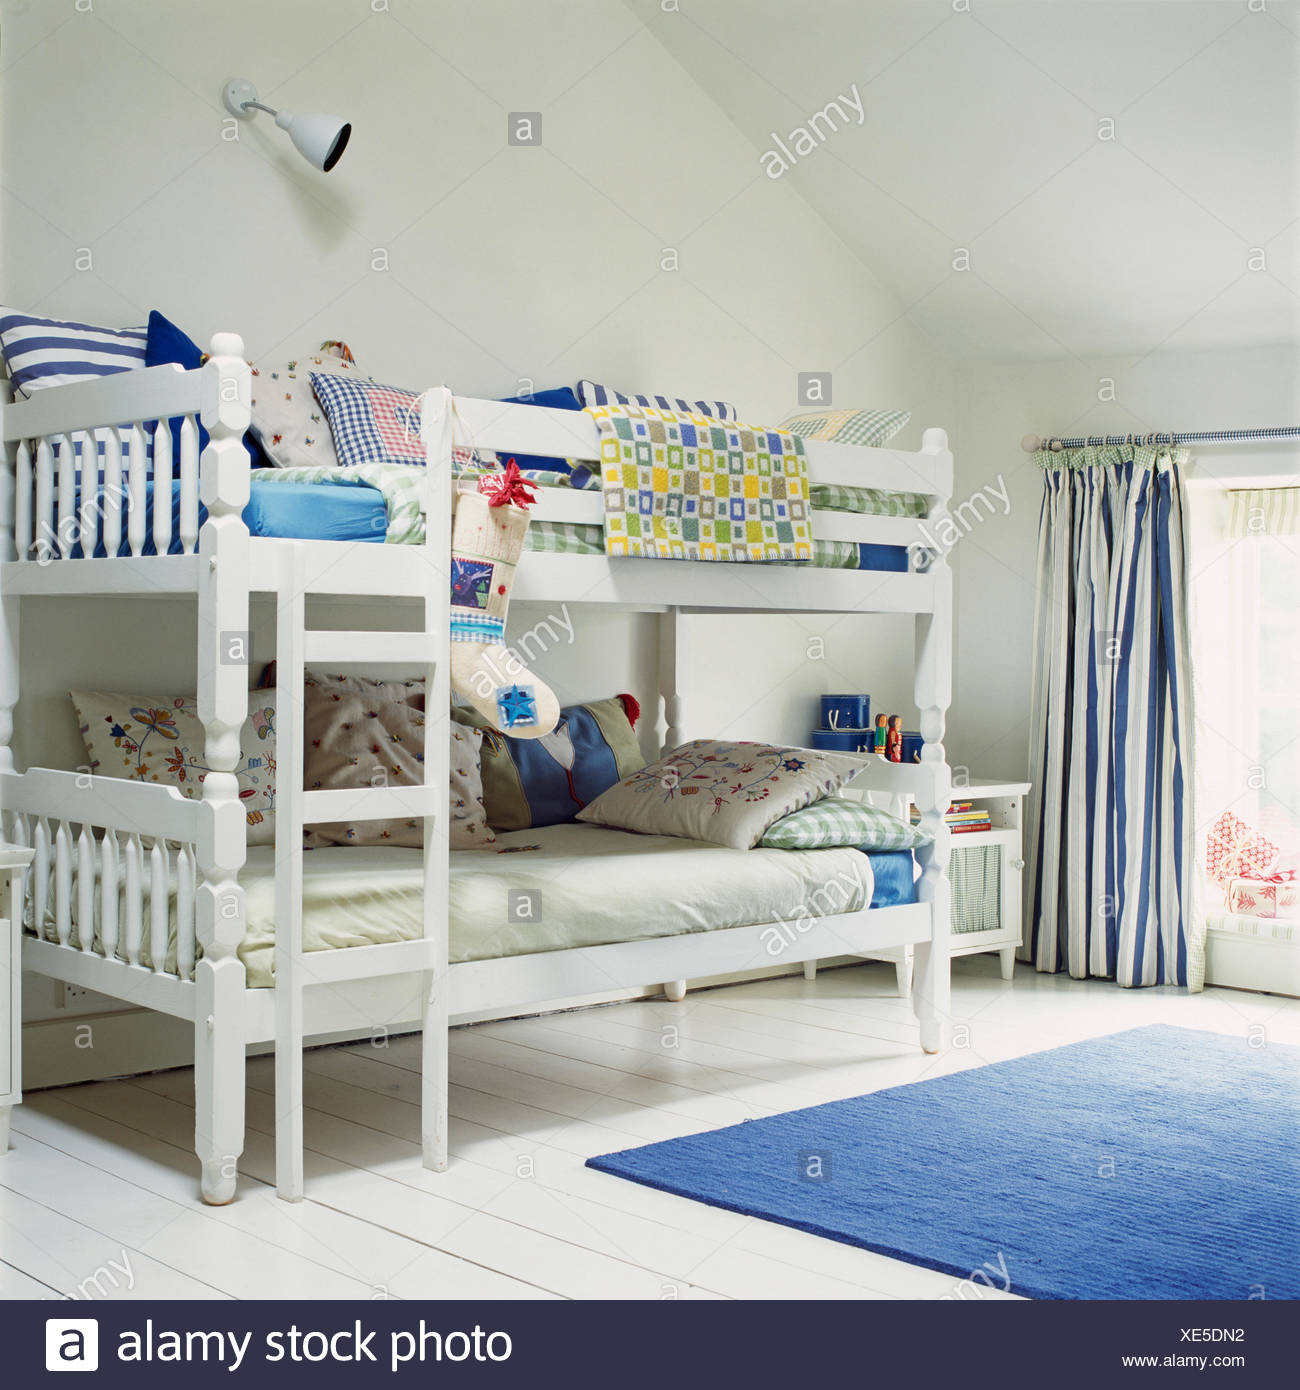 bunk beds for attic rooms